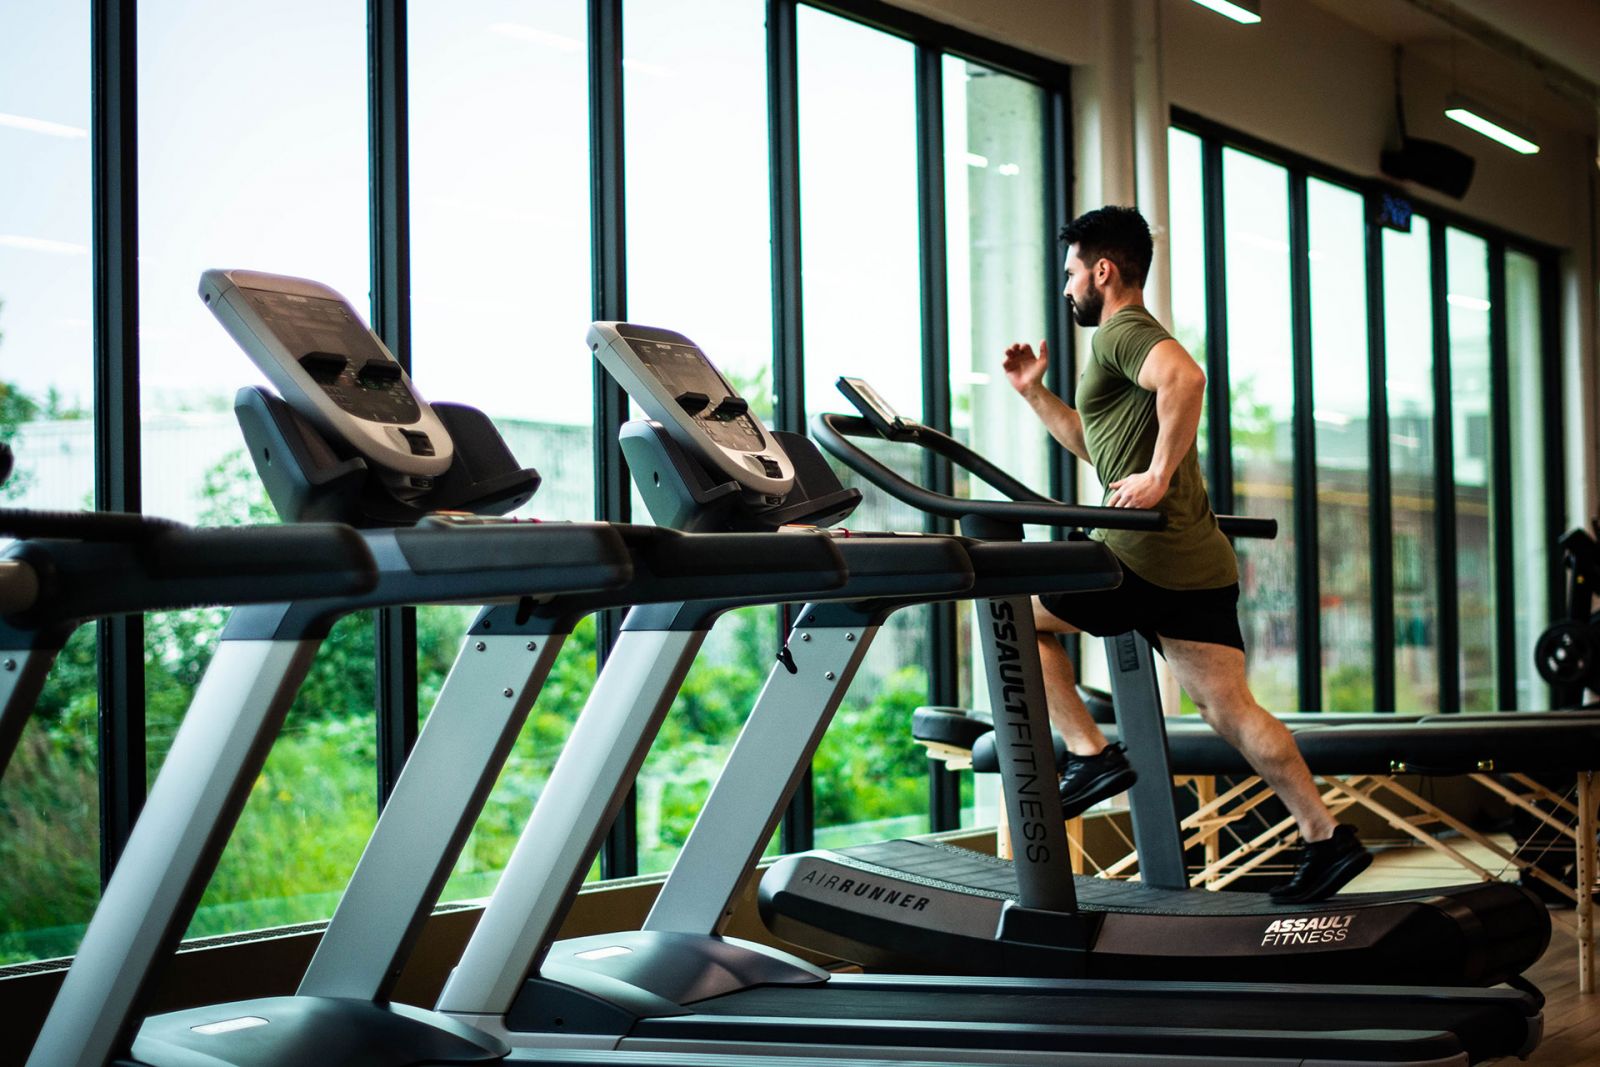 Practice safe distancing when training at a gym